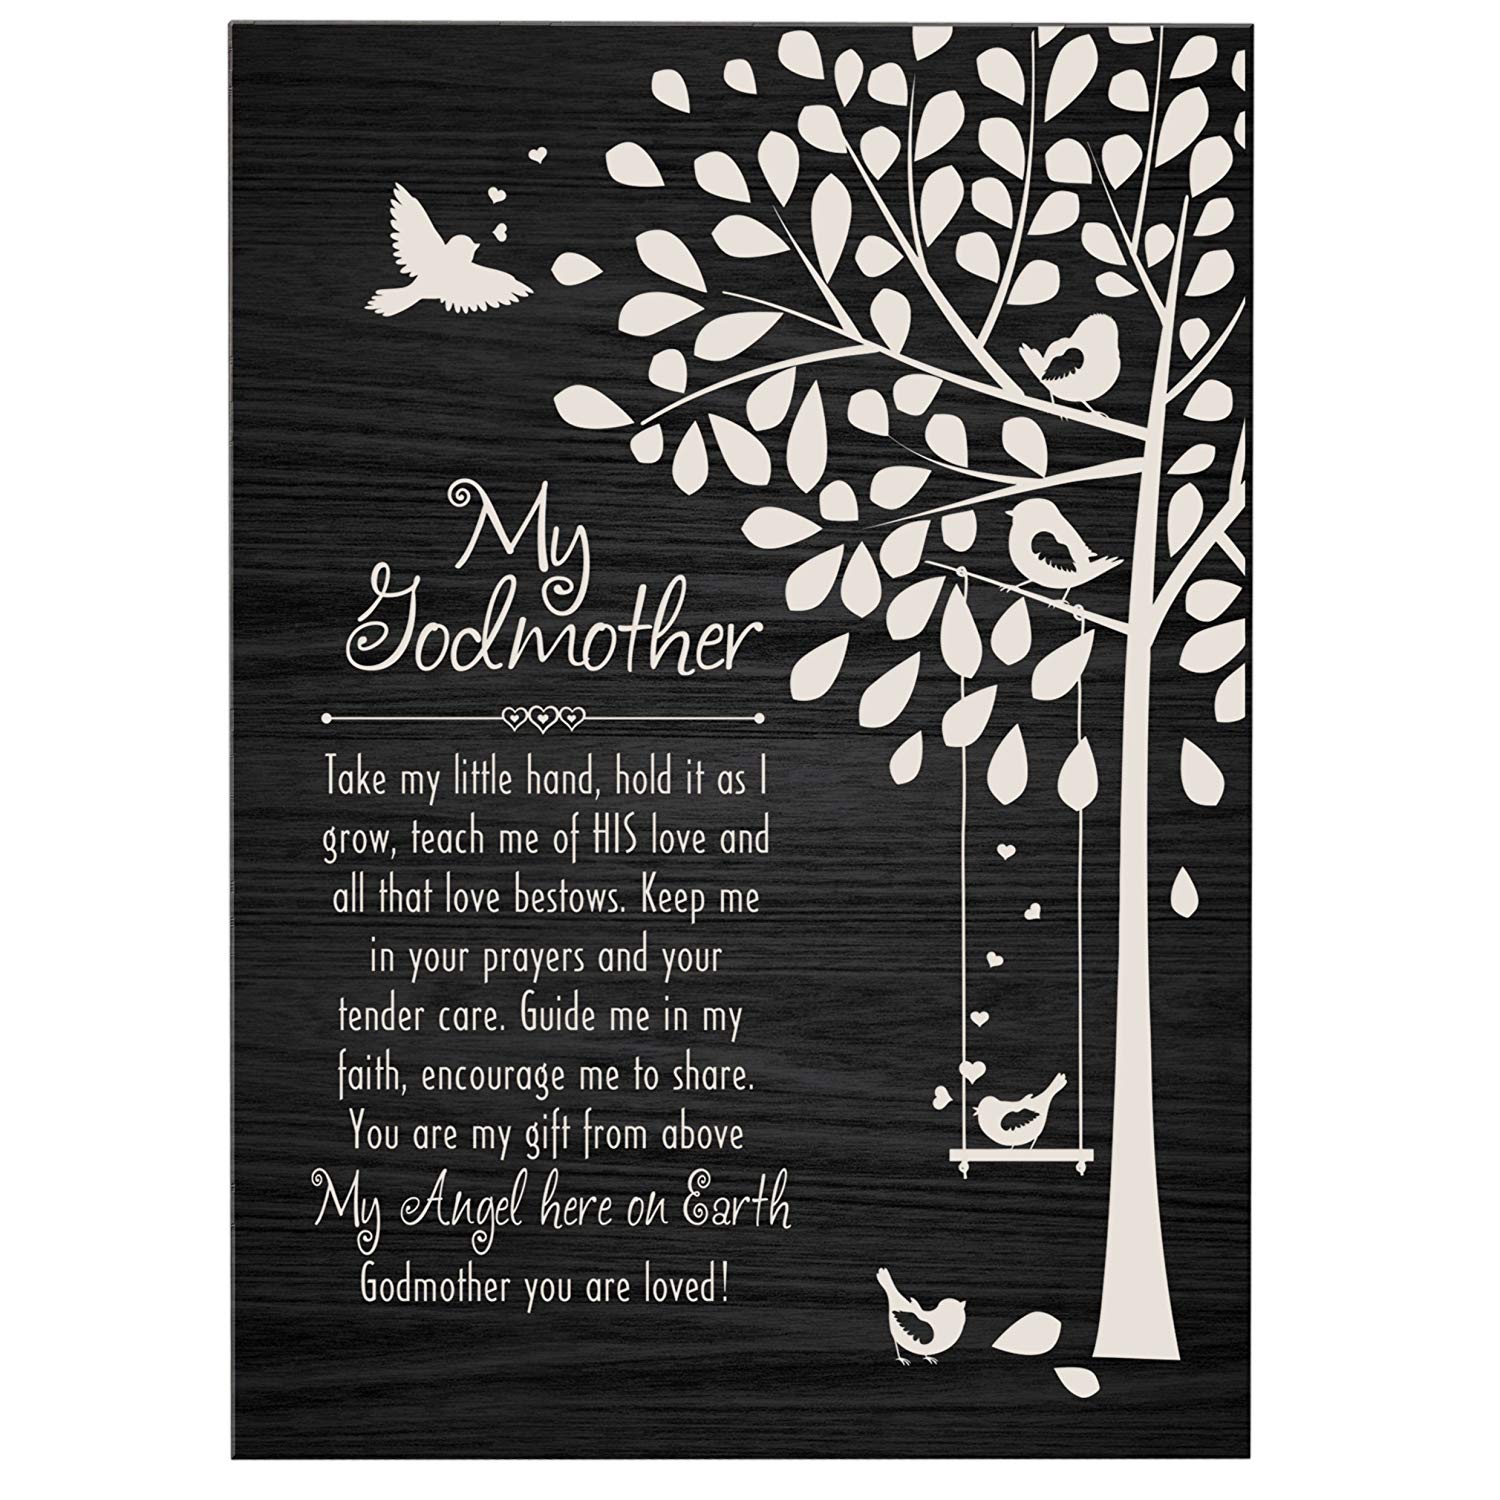 Godmother Wall Hanging Plaque Gift - Take My Little Hand - LifeSong Milestones